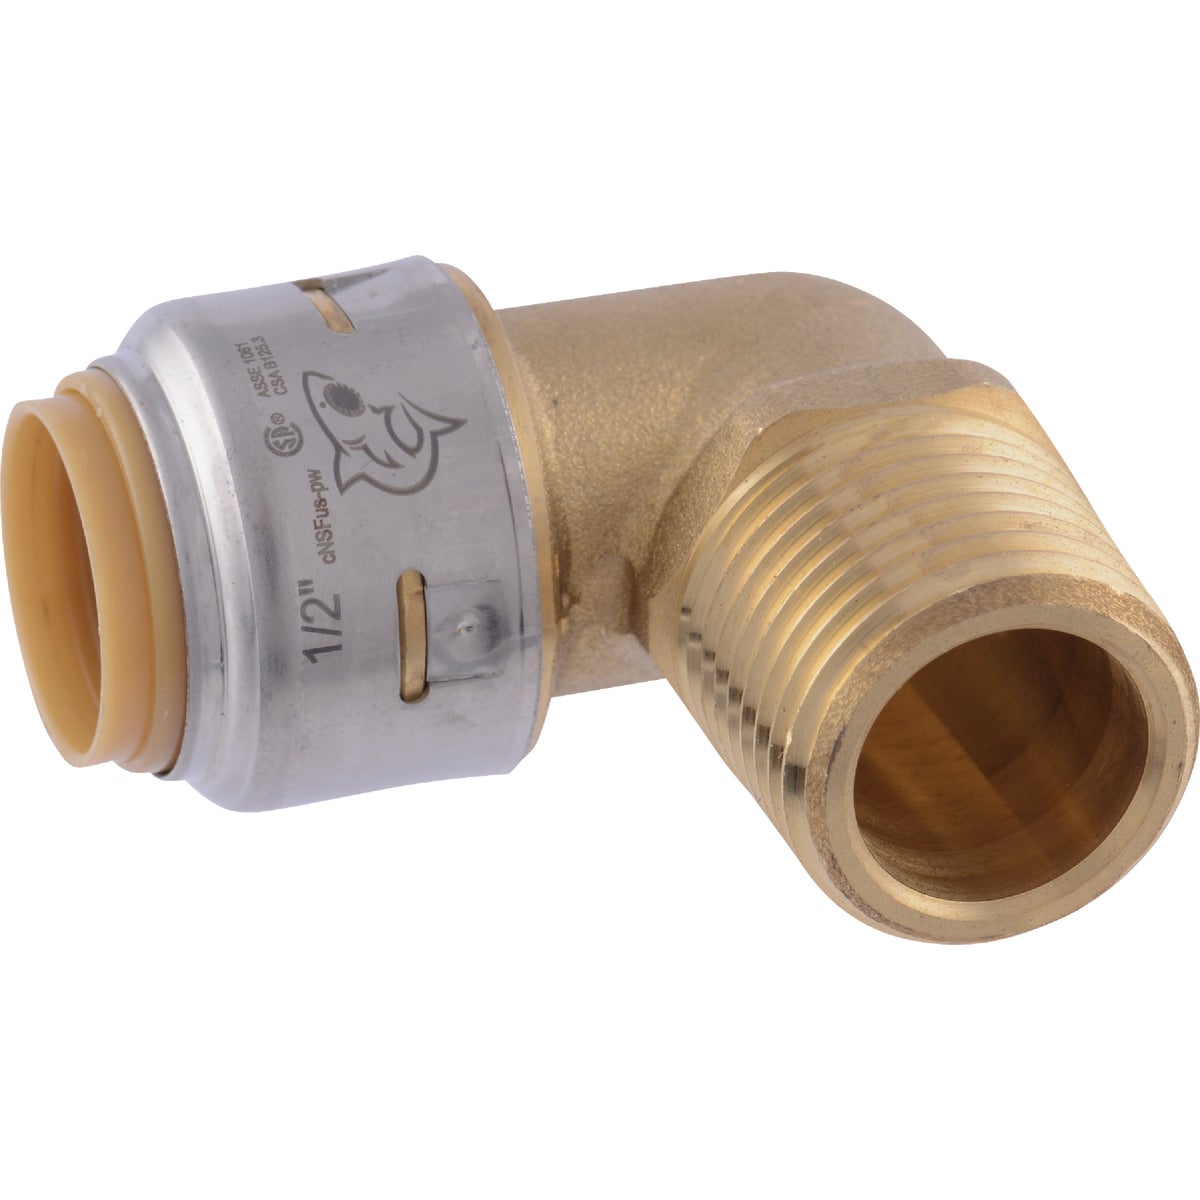 Item 464368, SharkBite Max push-to-connect fittings allow you make pipe connections with